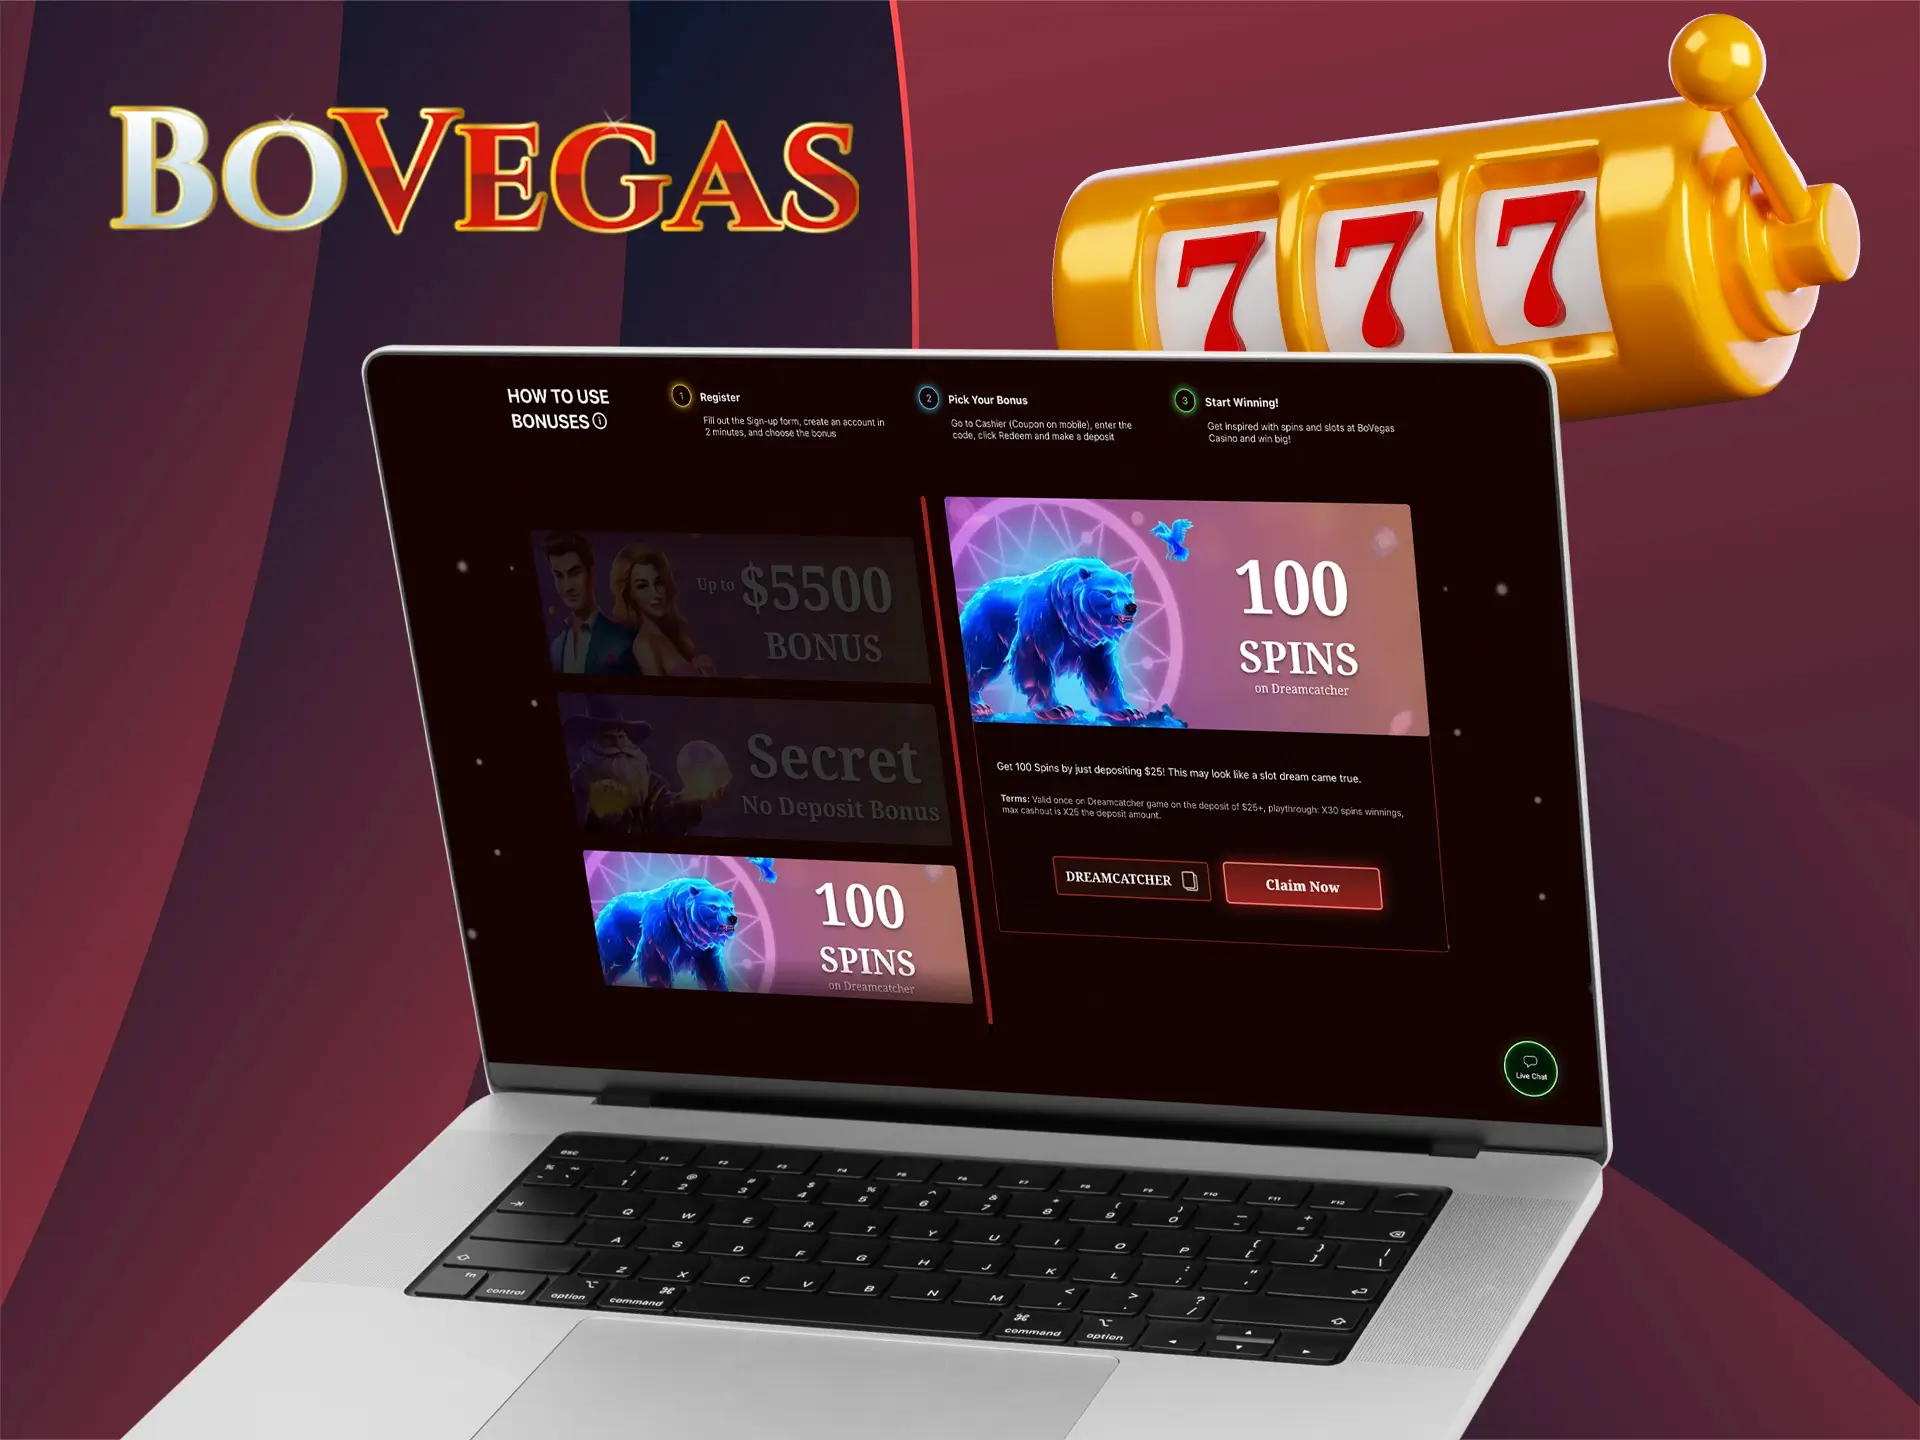 Sign up at BoVegas and immerse yourself in the popular big winning game Dreamcatcher.